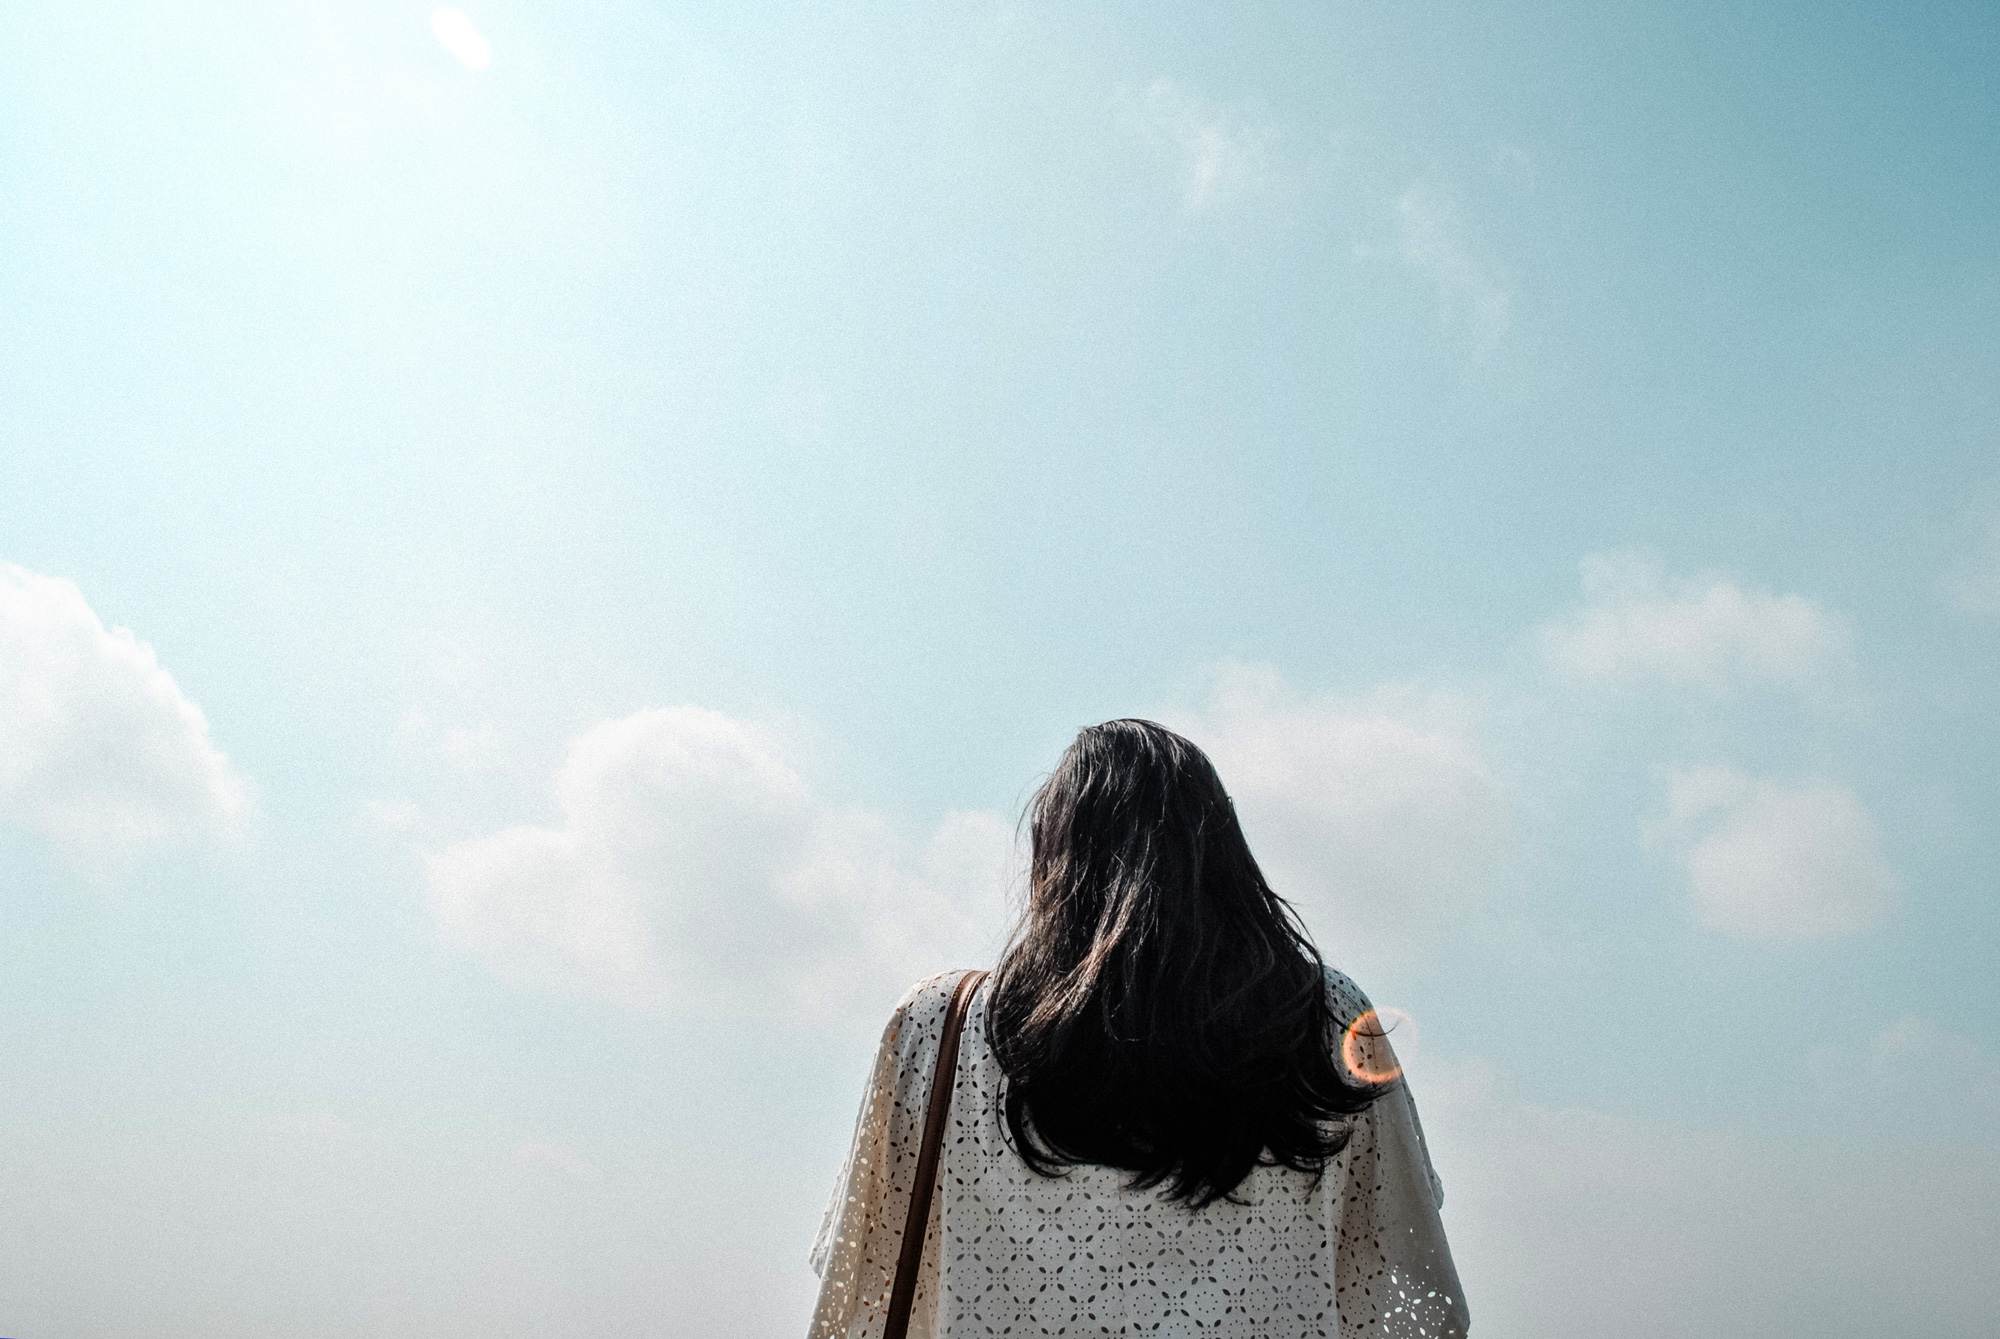 A woman looking up at the cloudy sky, which is a mix of light blue and light pink